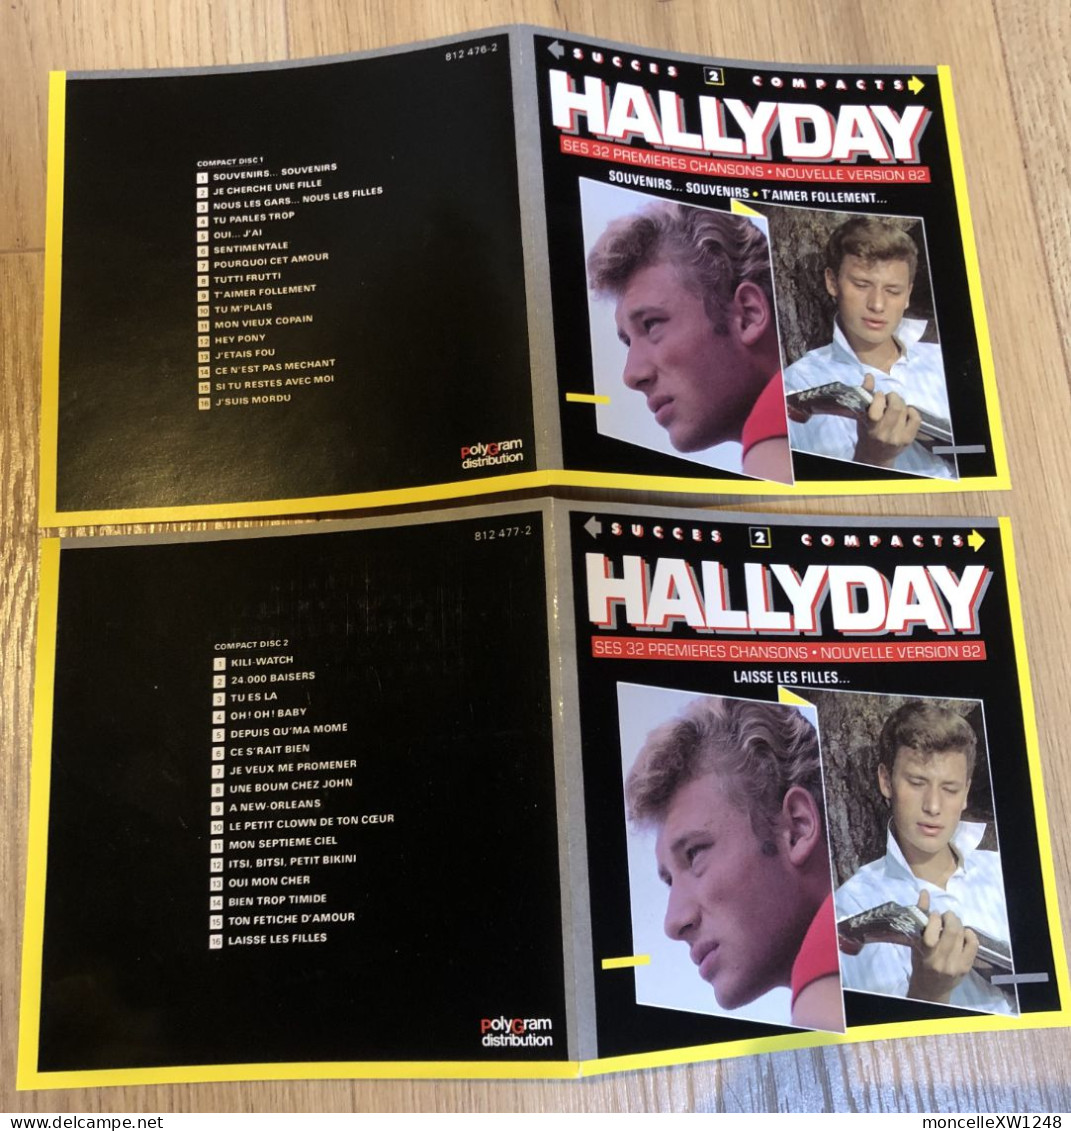 Johnny Hallyday - Double CD Ses 32 Premières Chansons Version 82 (1982) - Complete Collections